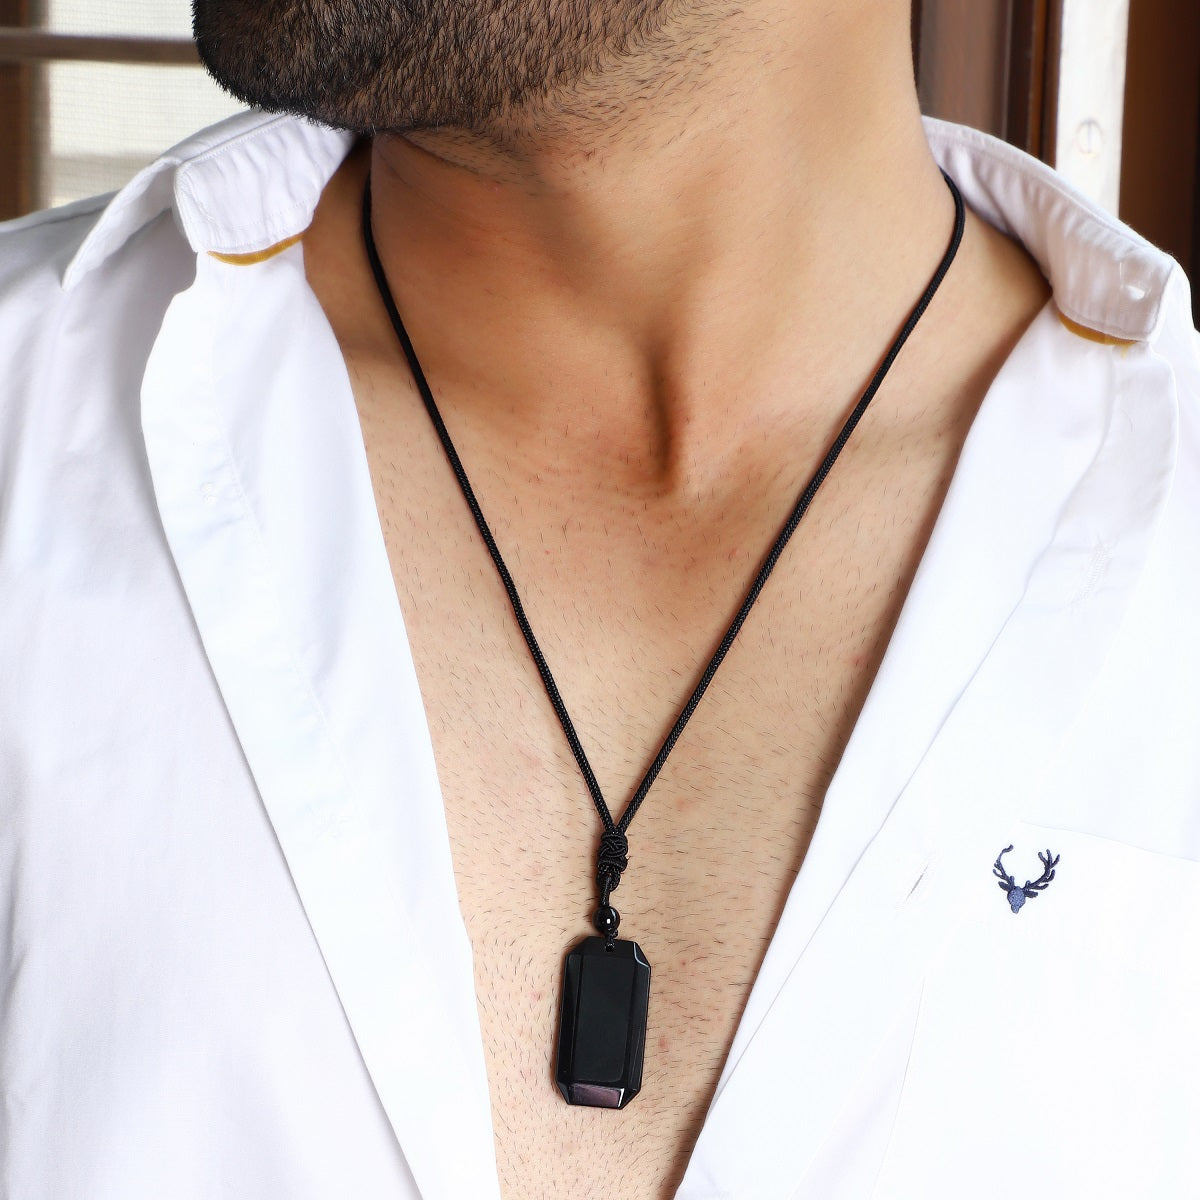  An image showcasing the pendant securely wrapped on the rope necklace, emphasizing its durability and stylish presentation.